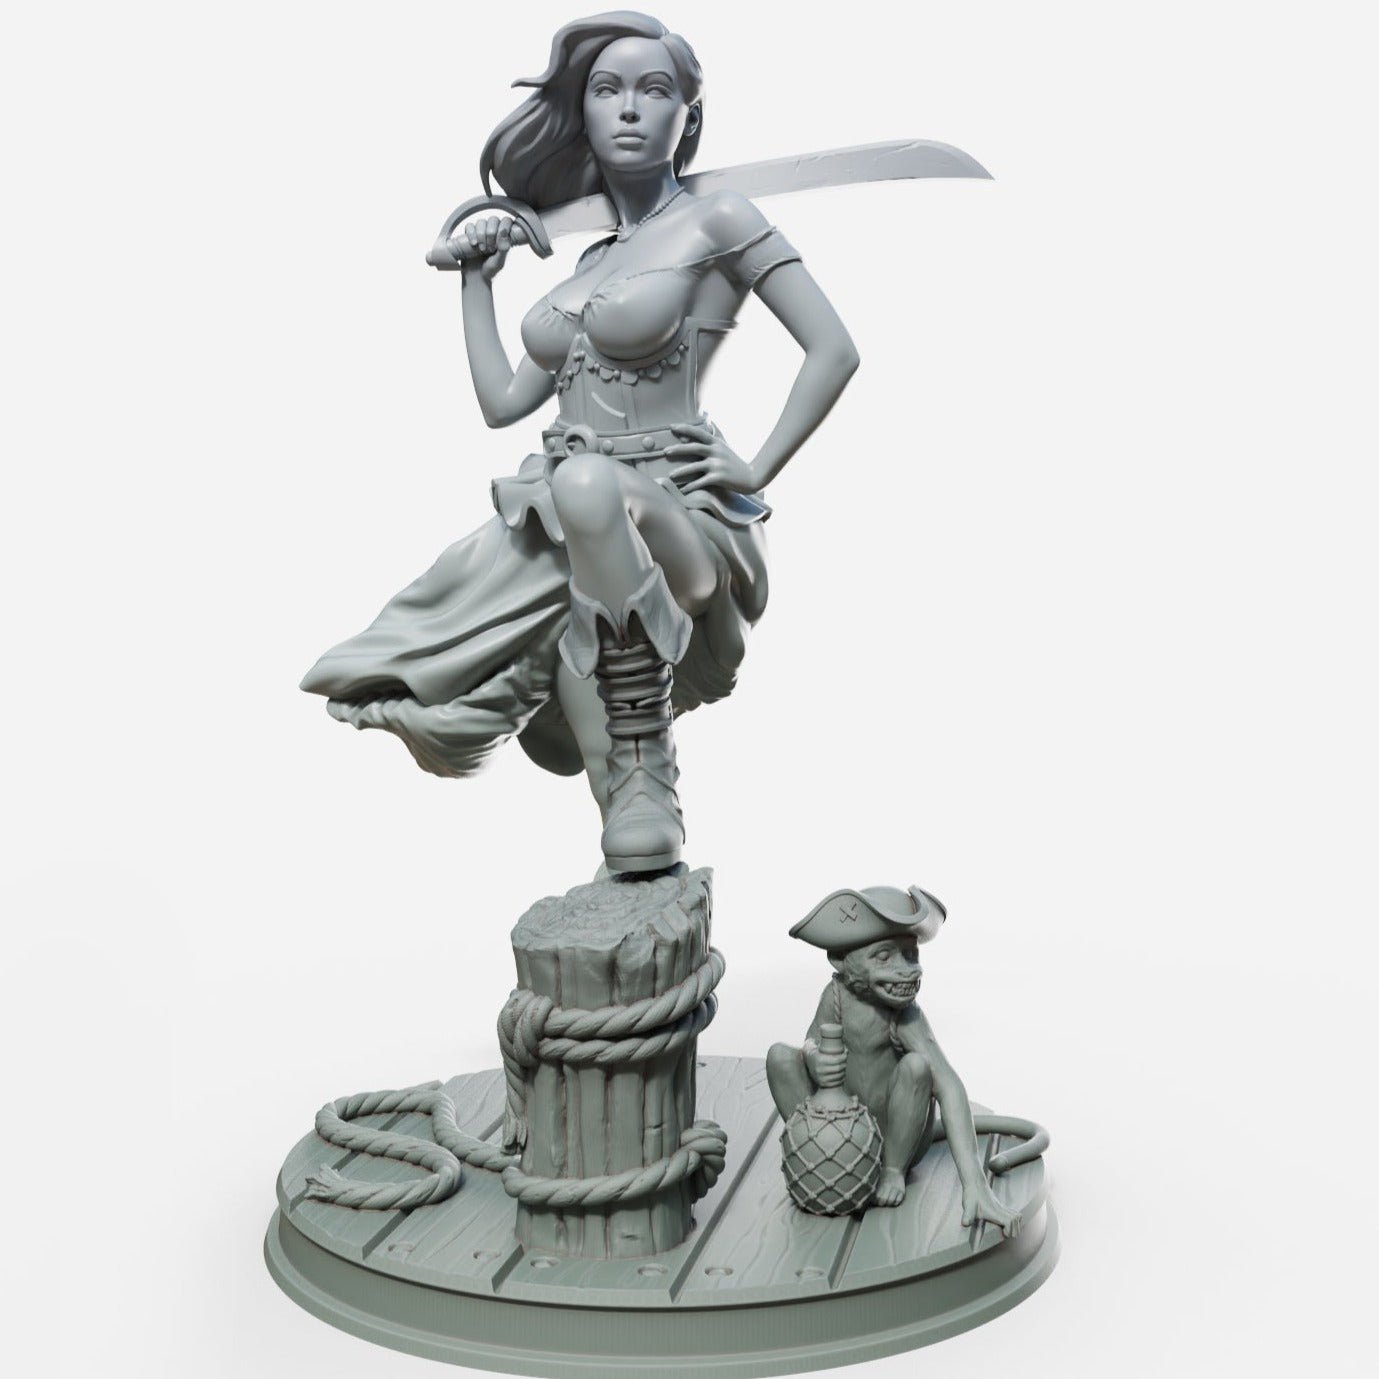 Marina 6 3d Printed miniature FanArt by Female Miniatures Scaled Collectables Statues & Figurines